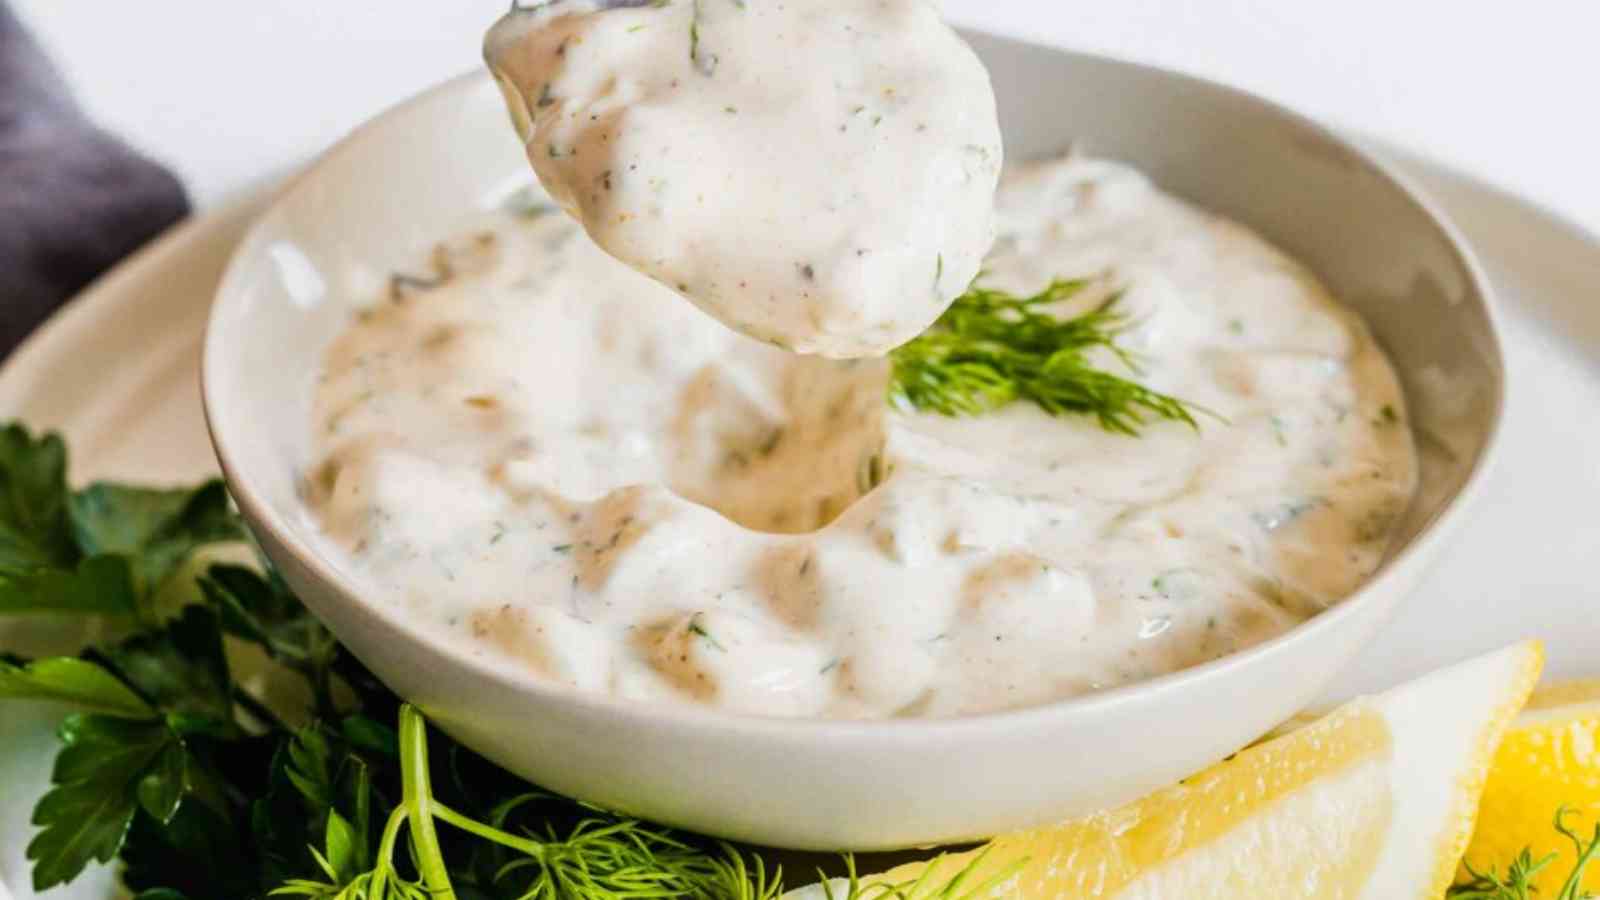 National Tartar Sauce Day 2023: Date, History, Facts